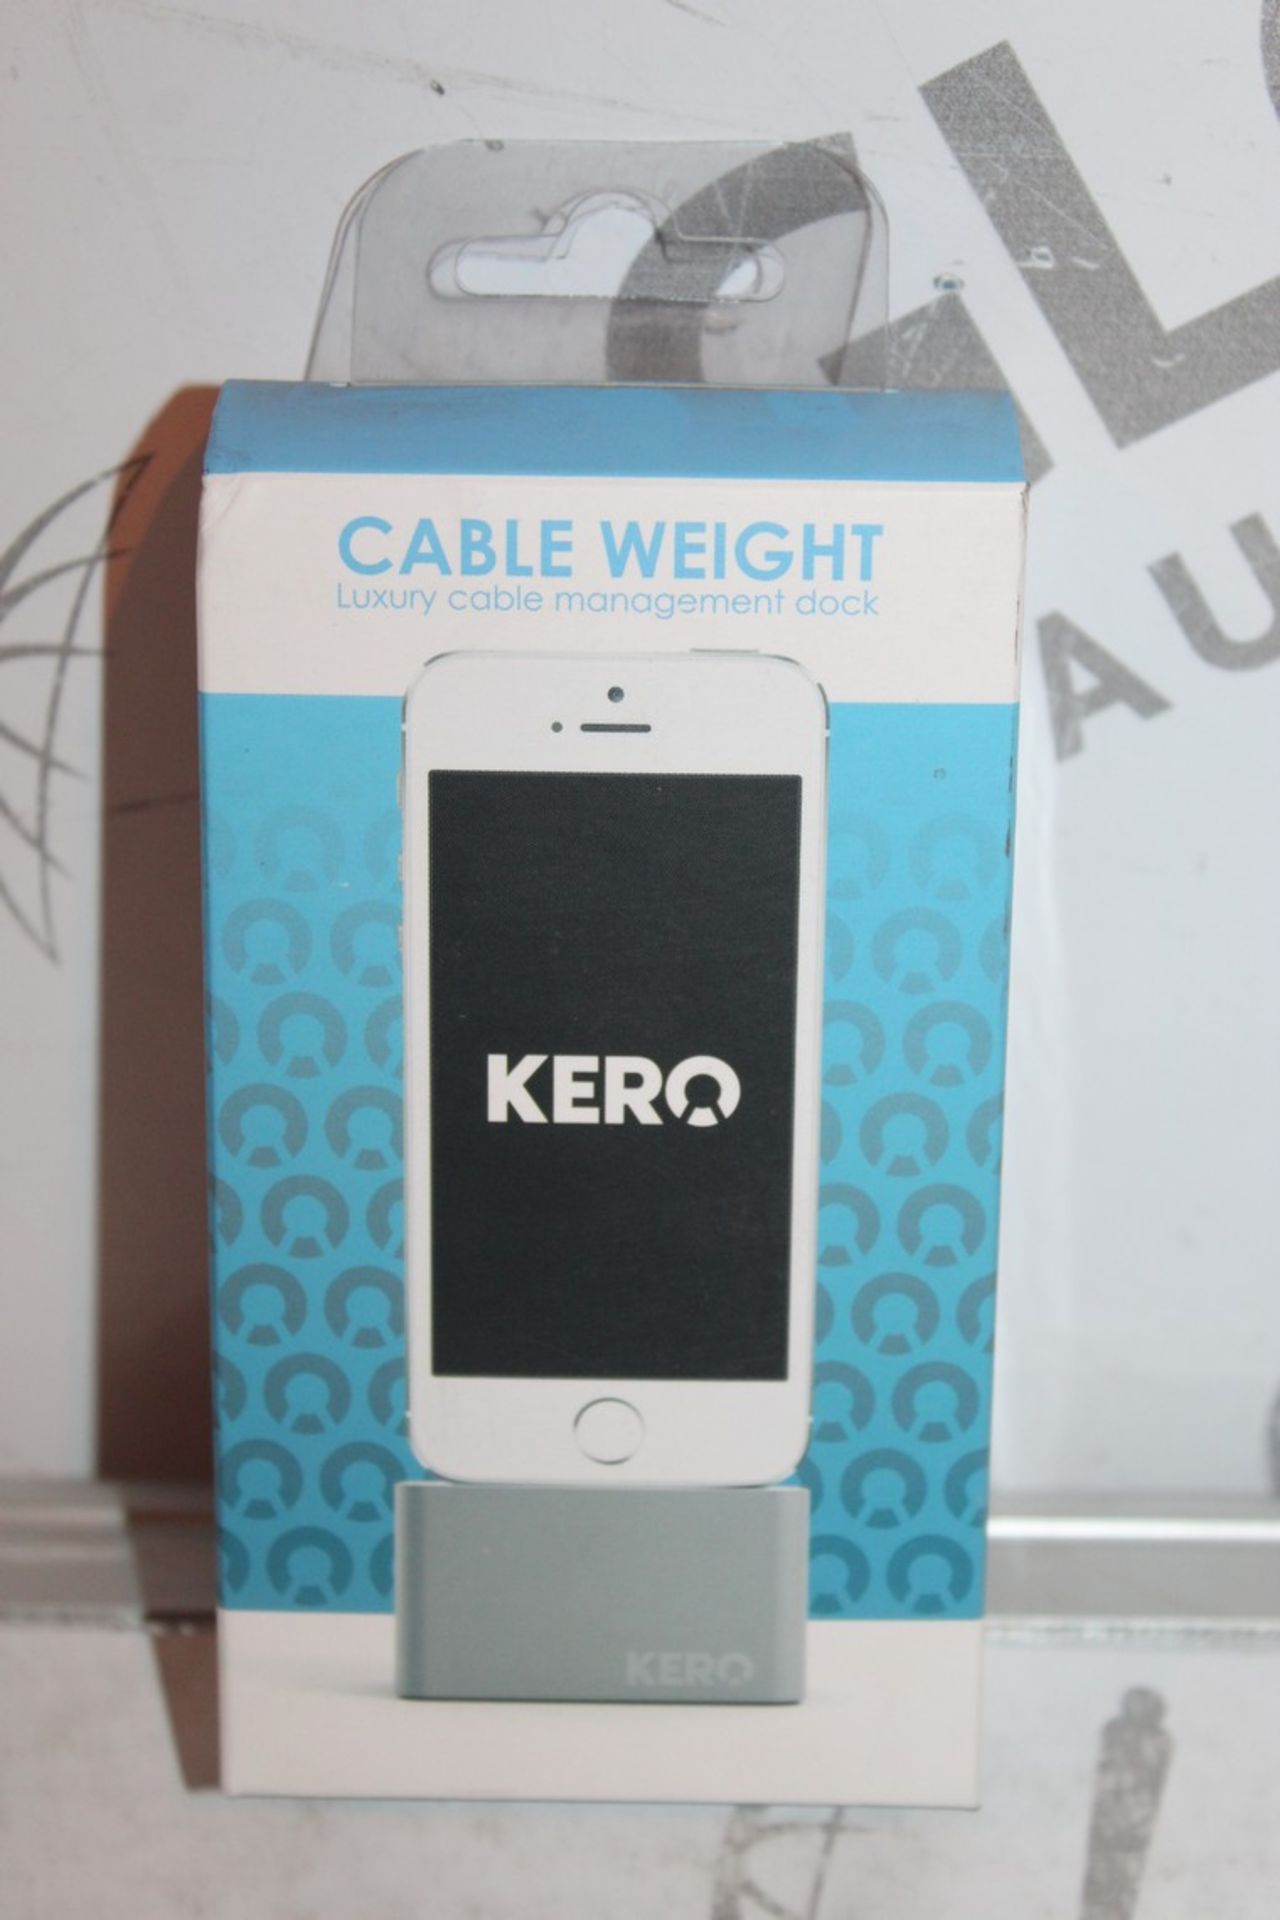 Lot to Contain 5 Brand New Kero Cable Weight Luxury Cable Management Dock Combined RRP £175